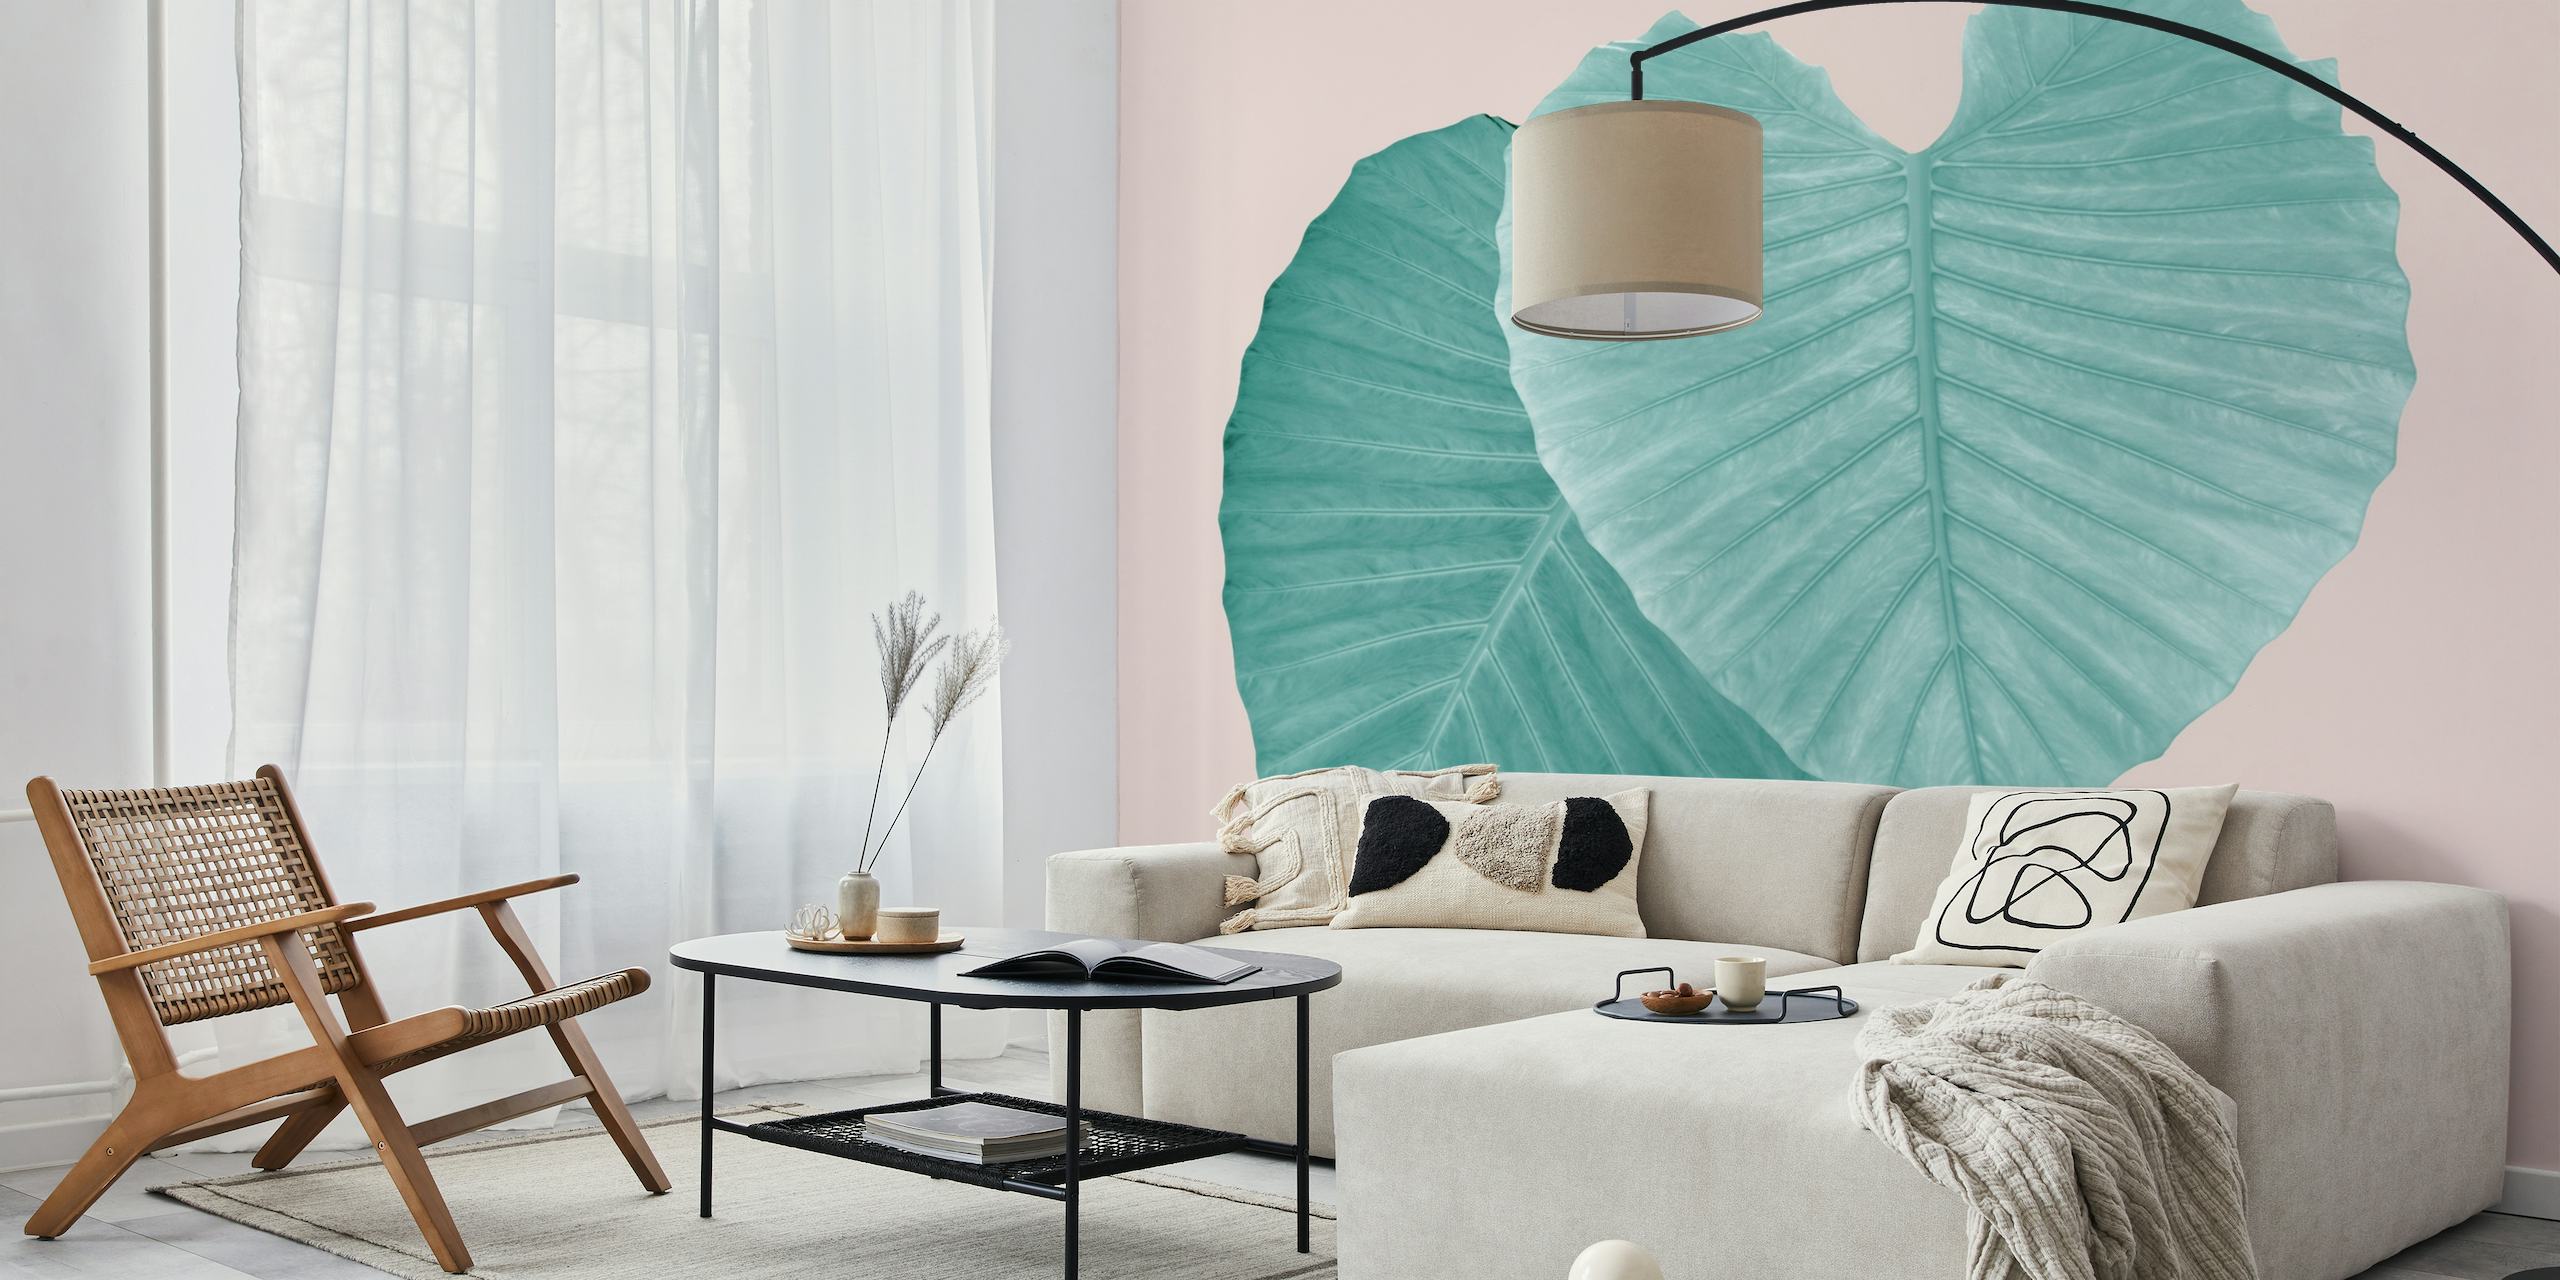 Teal leaves forming a heart on blush pink background wall mural